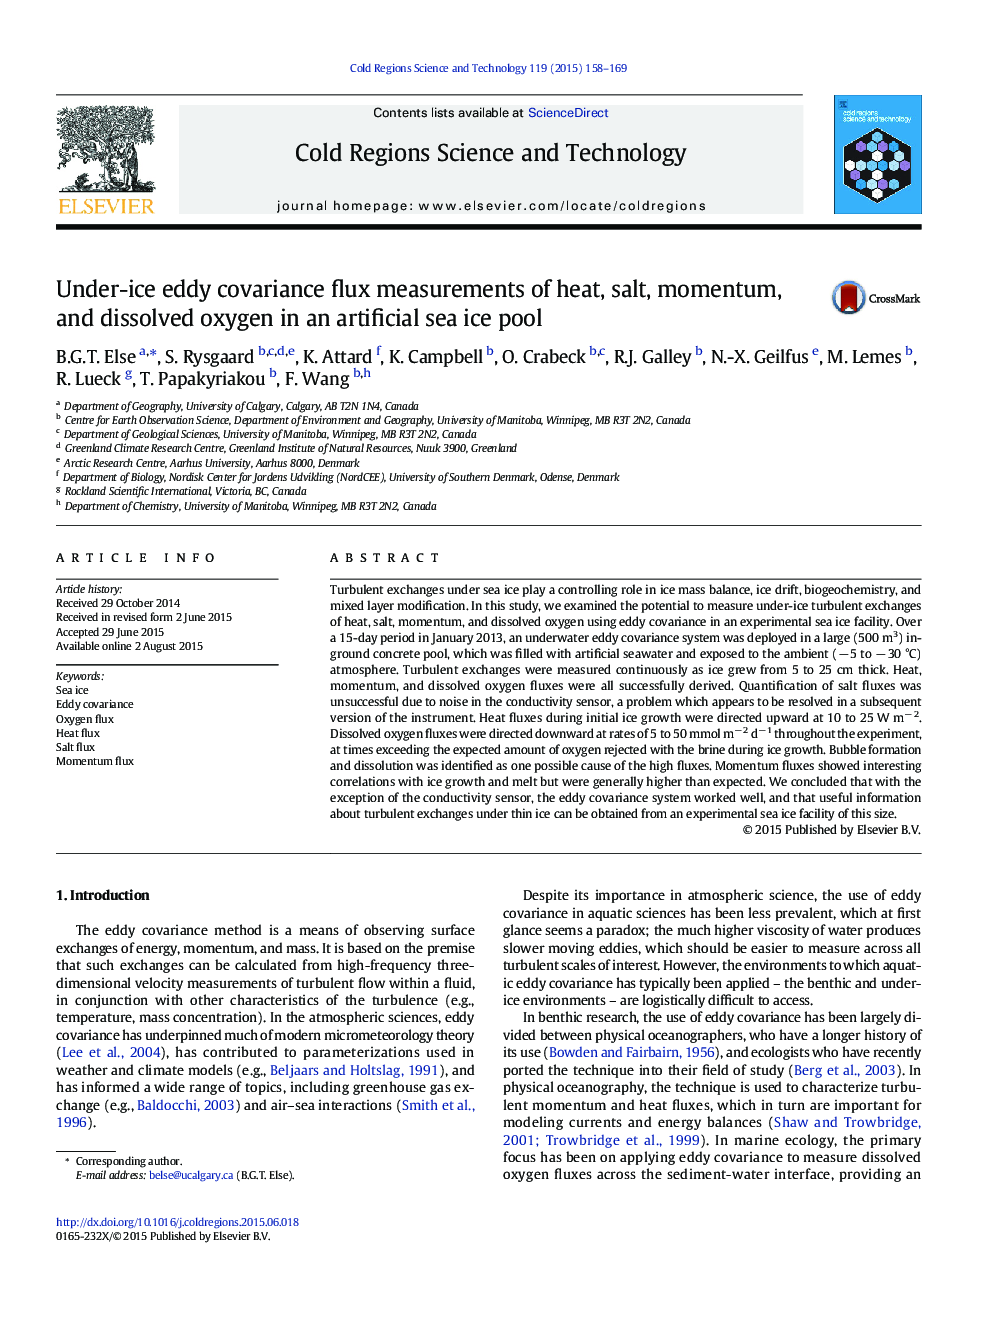 Under-ice eddy covariance flux measurements of heat, salt, momentum, and dissolved oxygen in an artificial sea ice pool